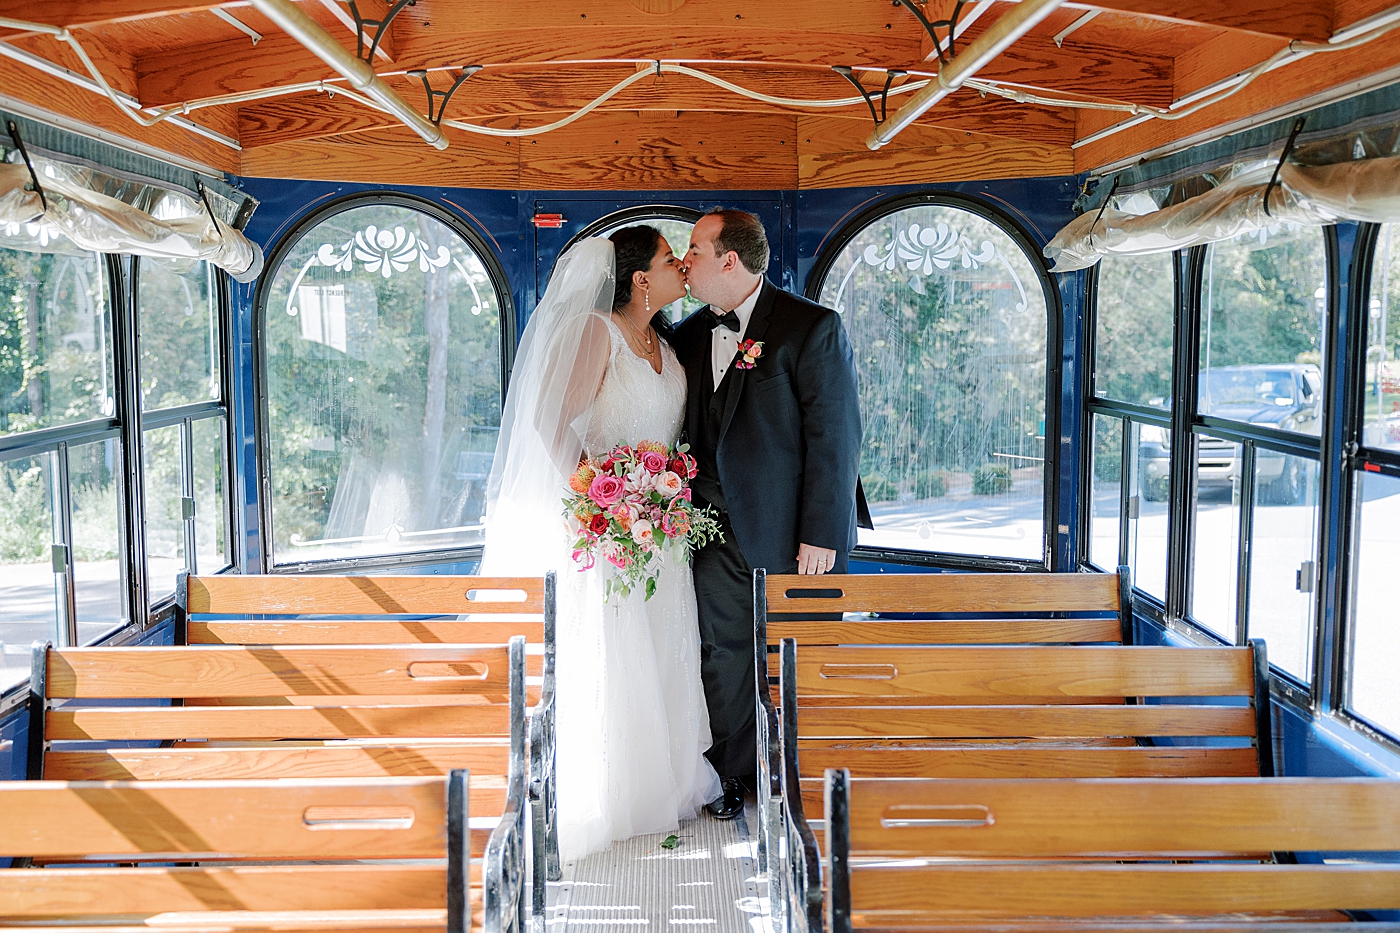 Bride and groom kissing in the back of a trolley | Image by Hope Helmuth Photography